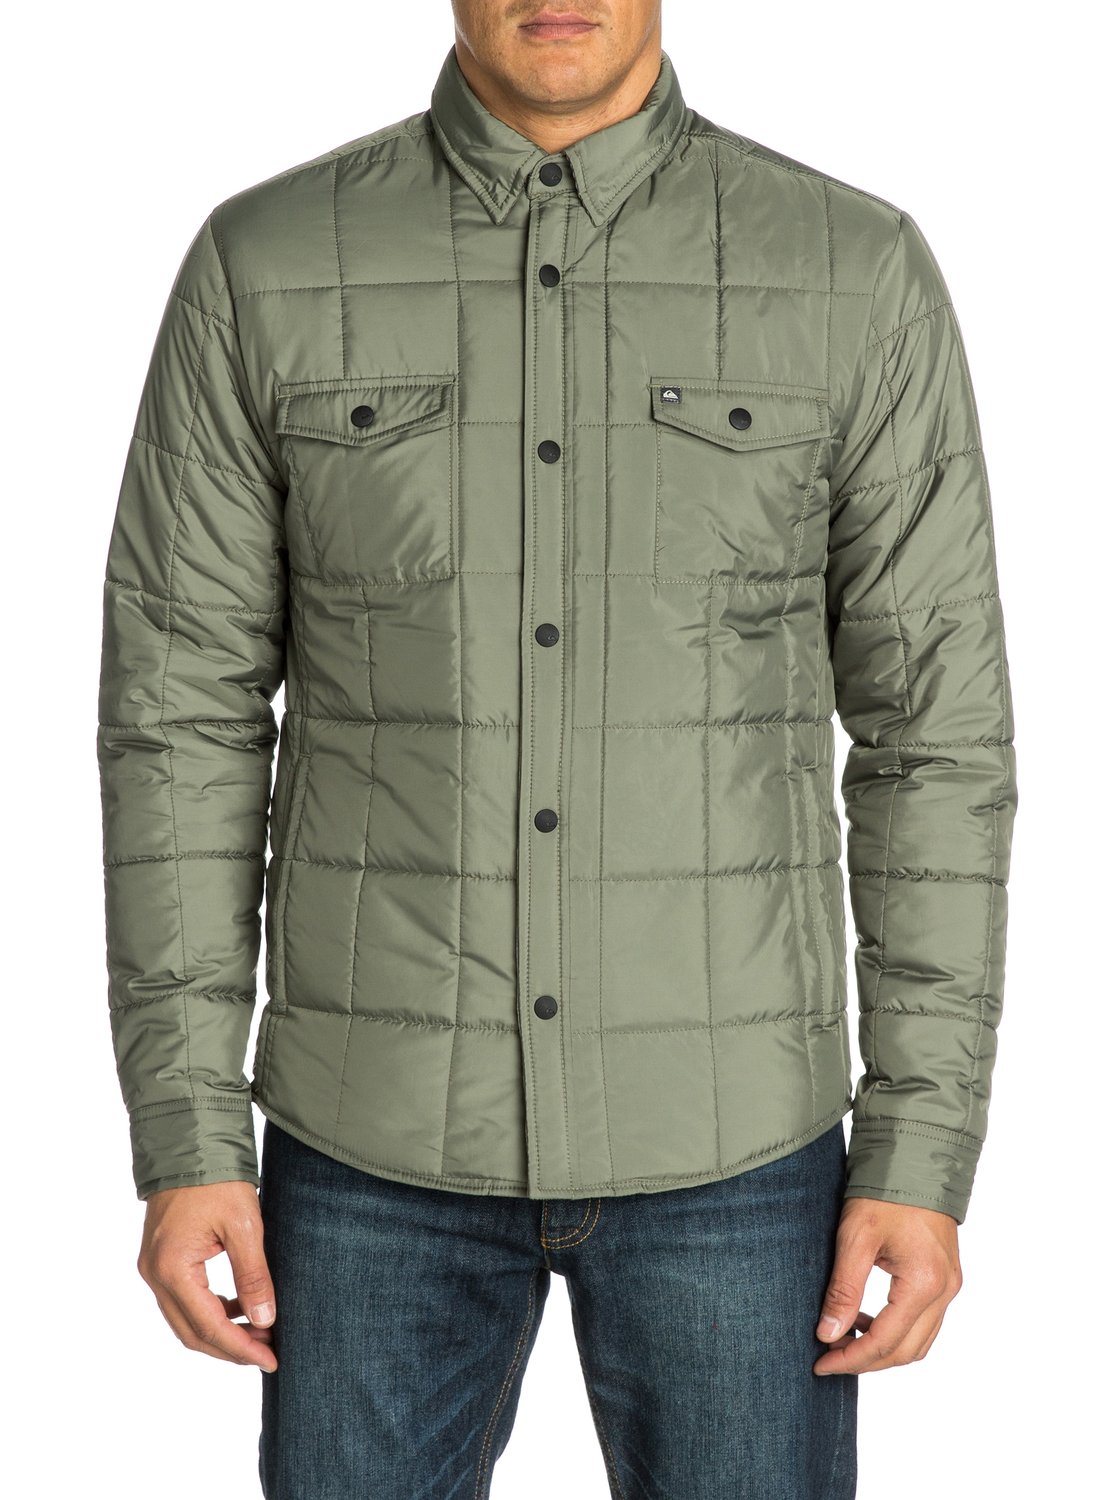 Shaly Slim Fit Jacket EQYJK03012 | Quiksilver